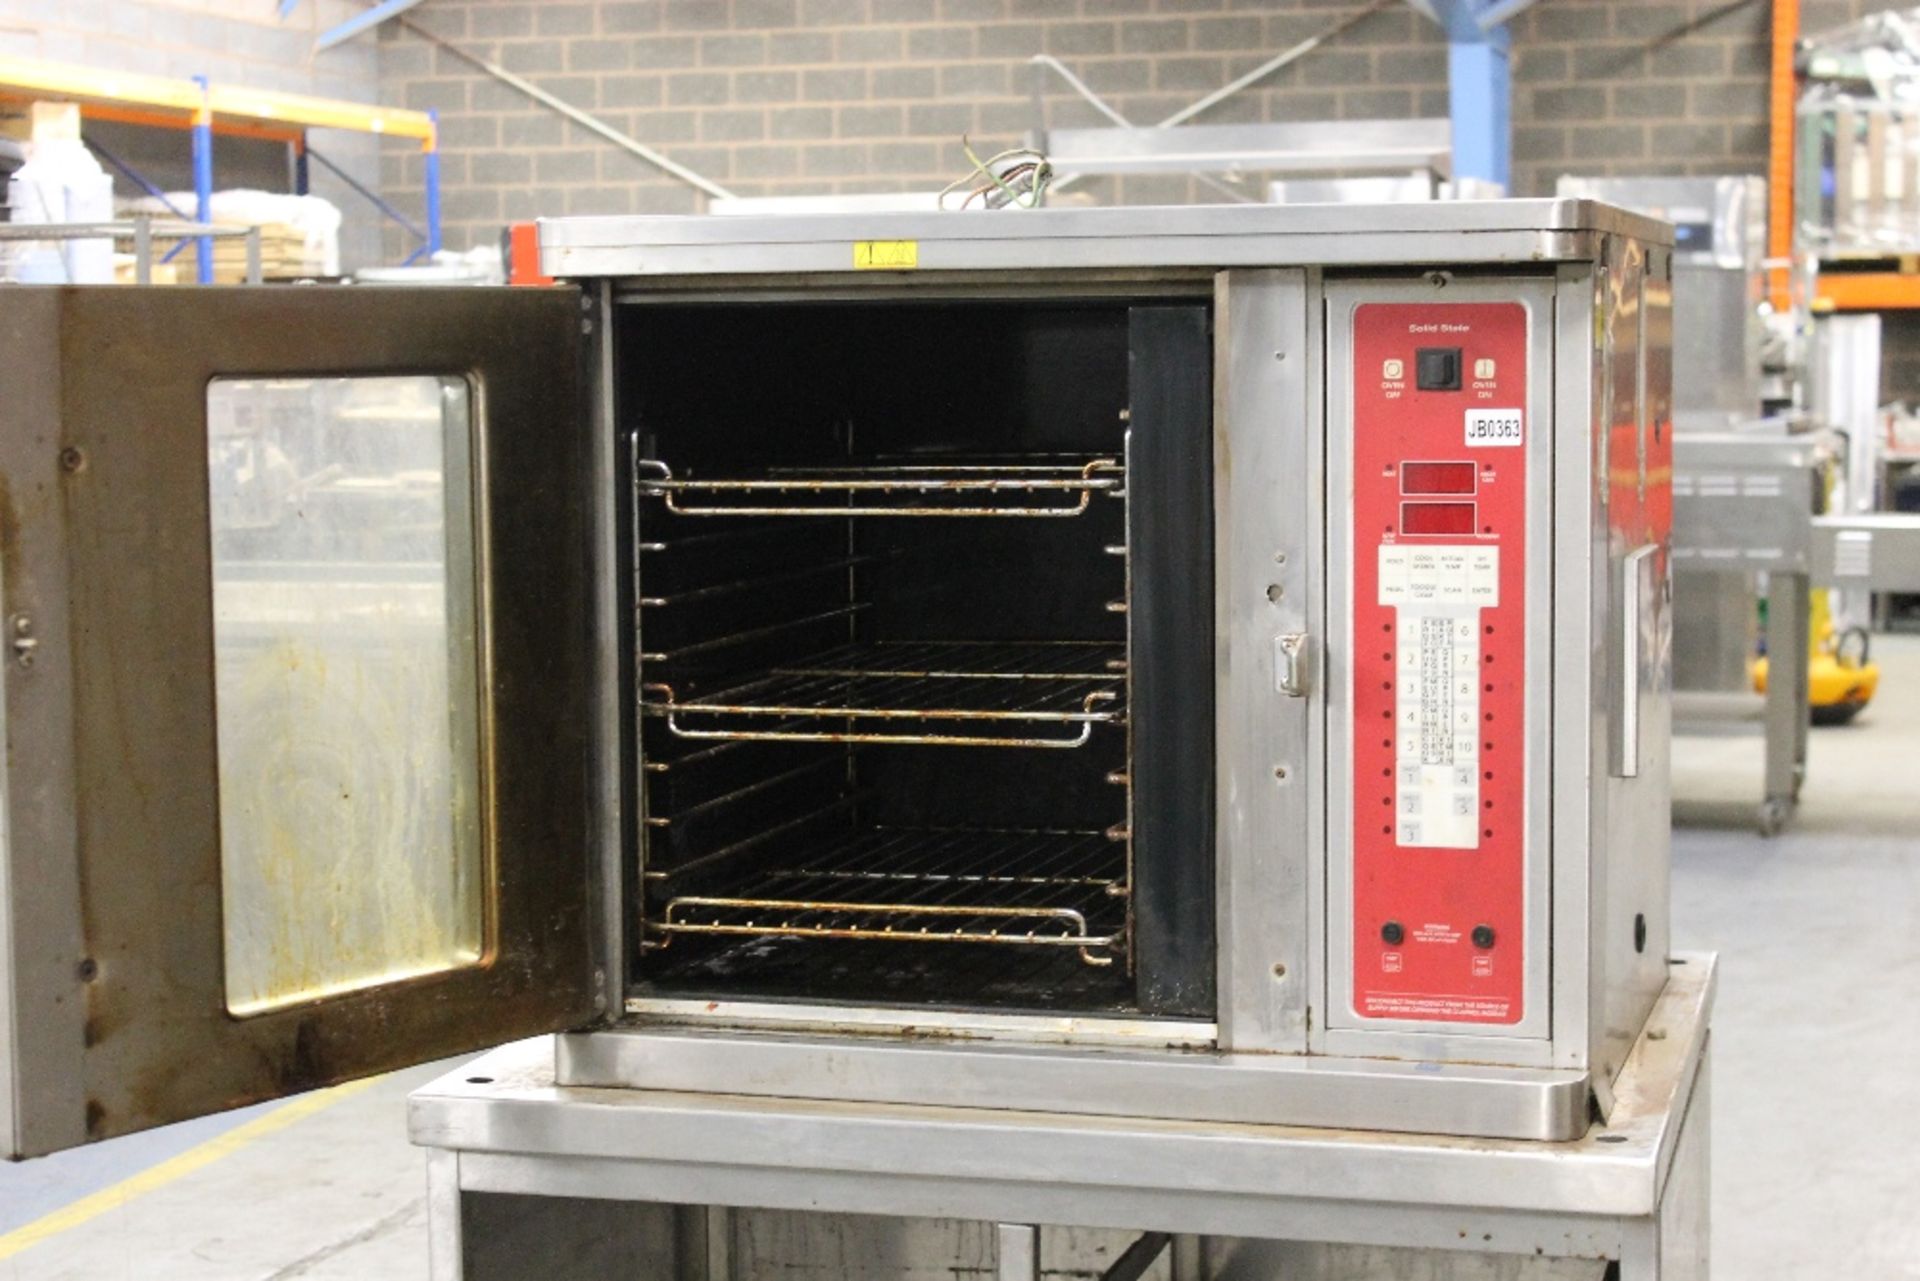 Blodgett Solid State Electric Convection Oven – on stand with under tray storage - Image 2 of 3